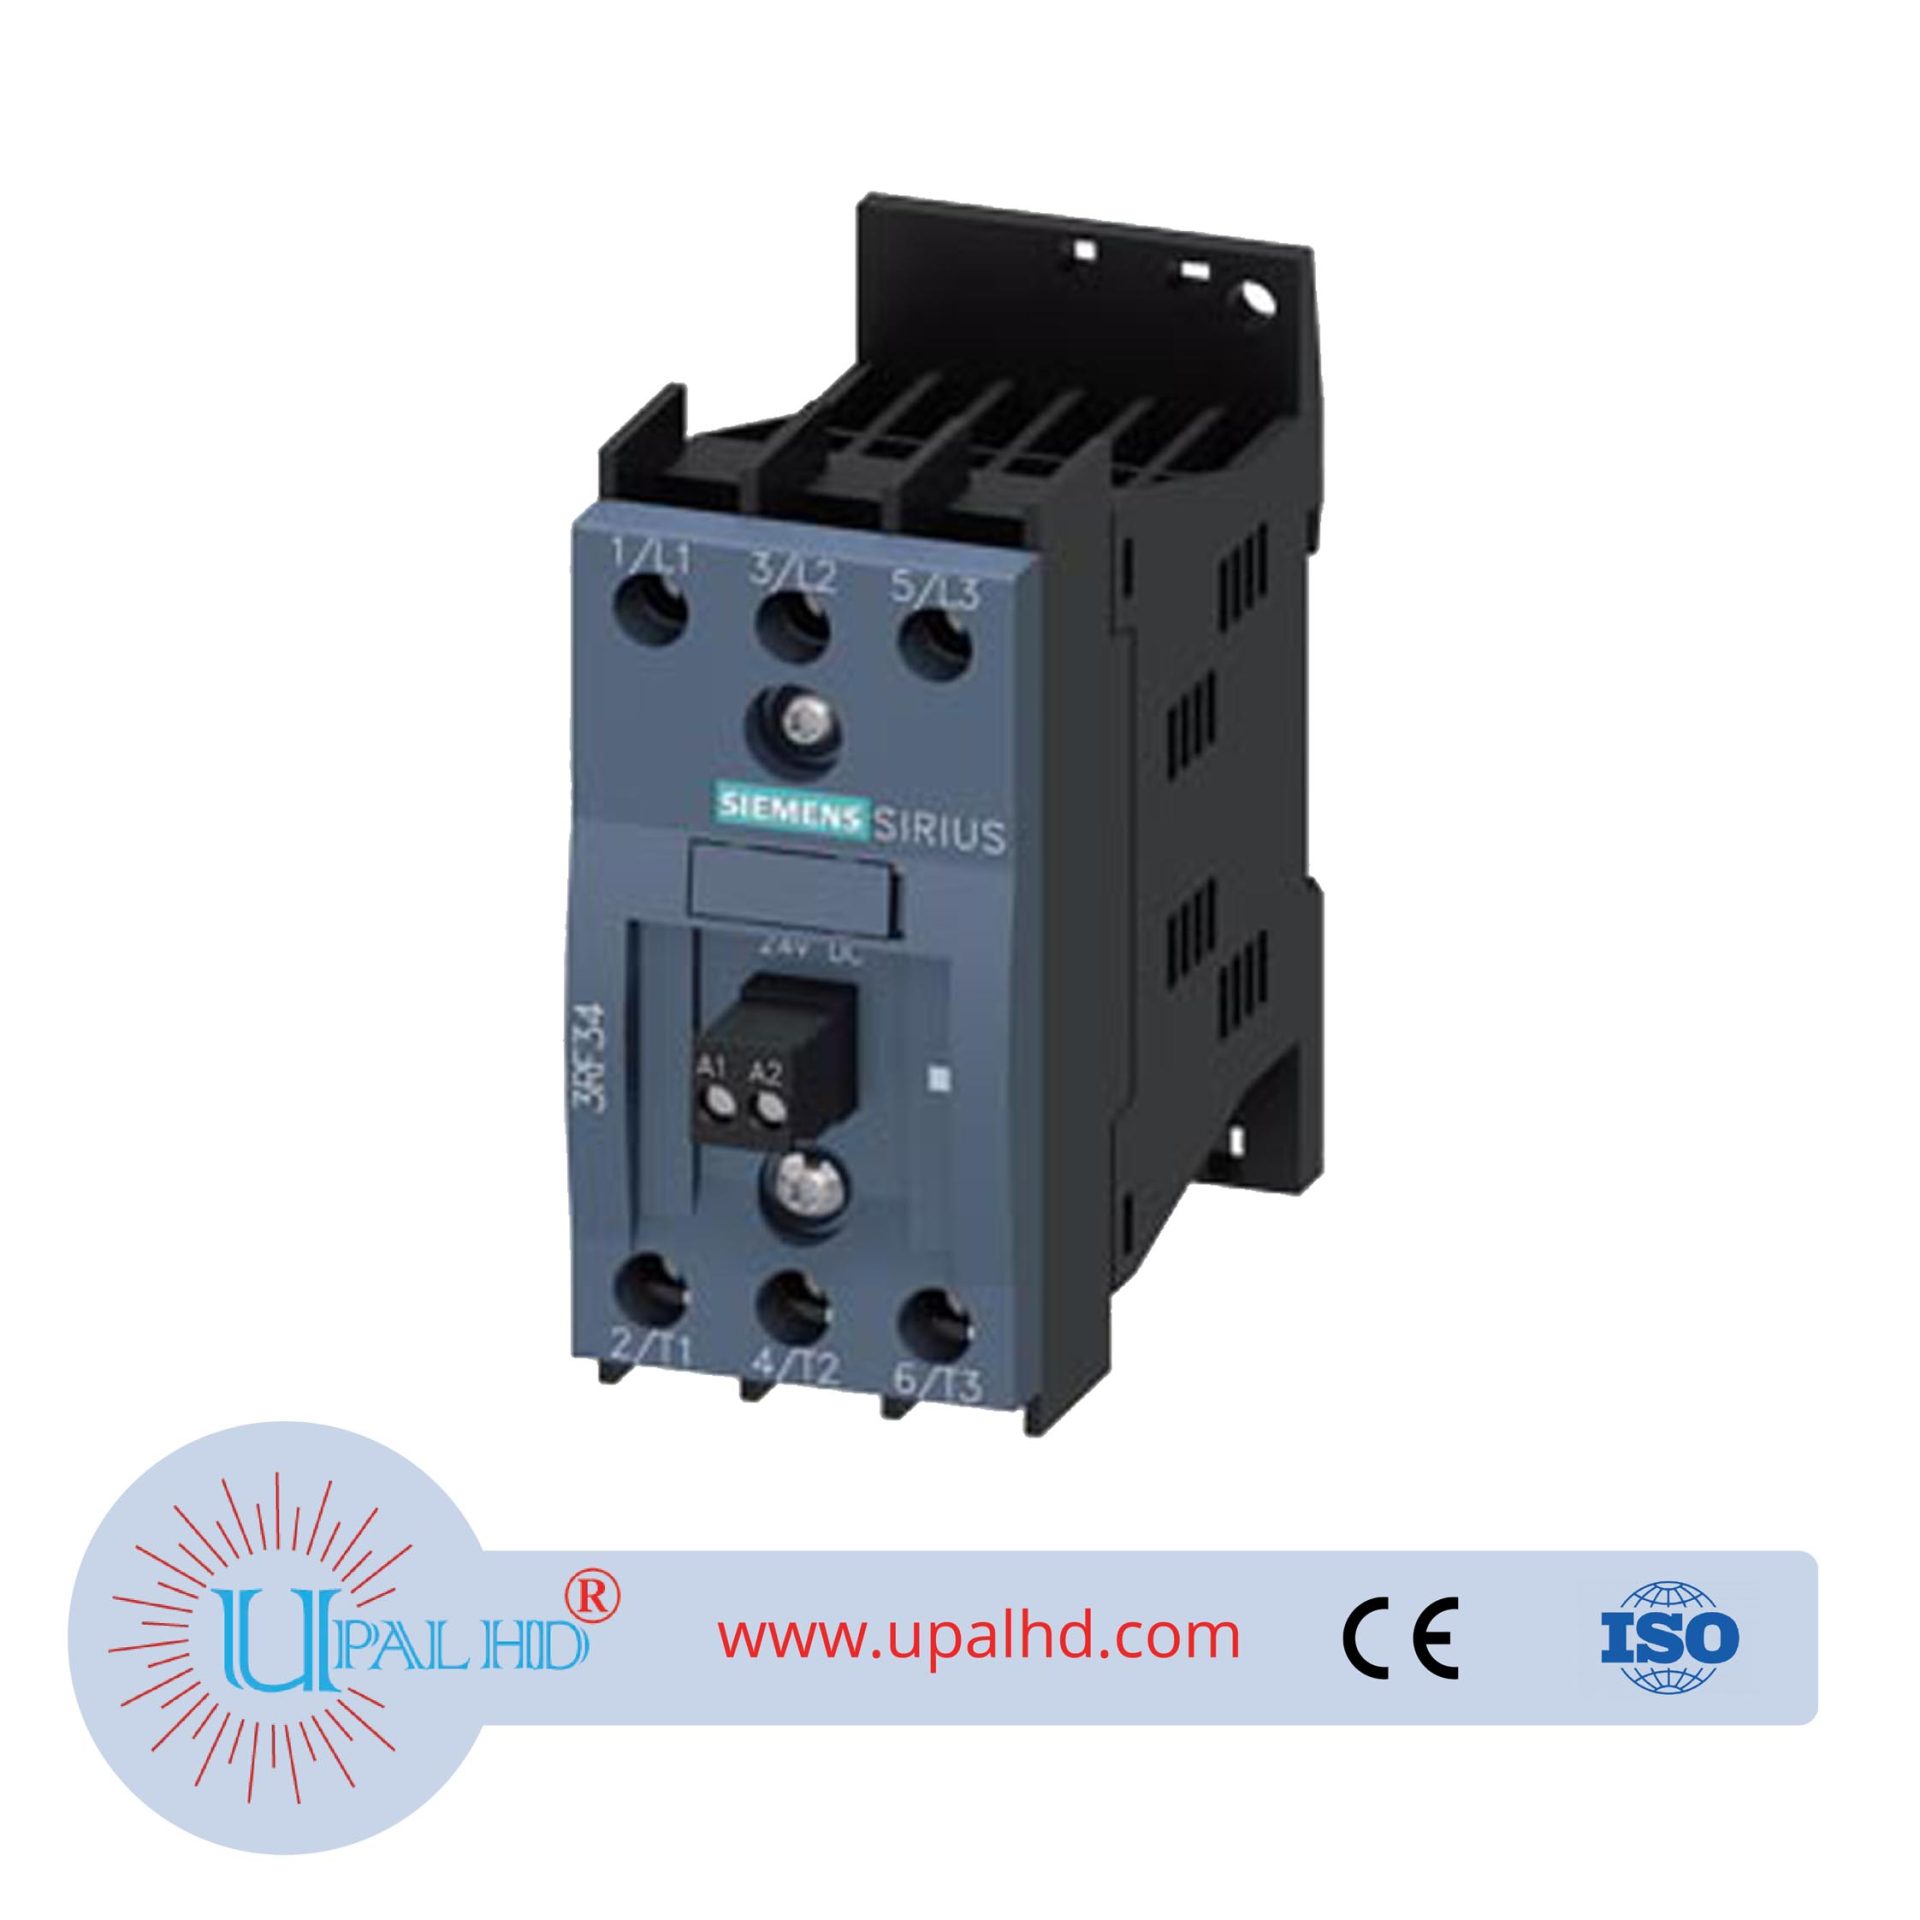 Solid-state contactor 3-phase 3RF3 AC 53 / 5.2 A / 40 °C 48-480 V / 24 V DC 2-phase controlled Instantaneous switching screw terminal